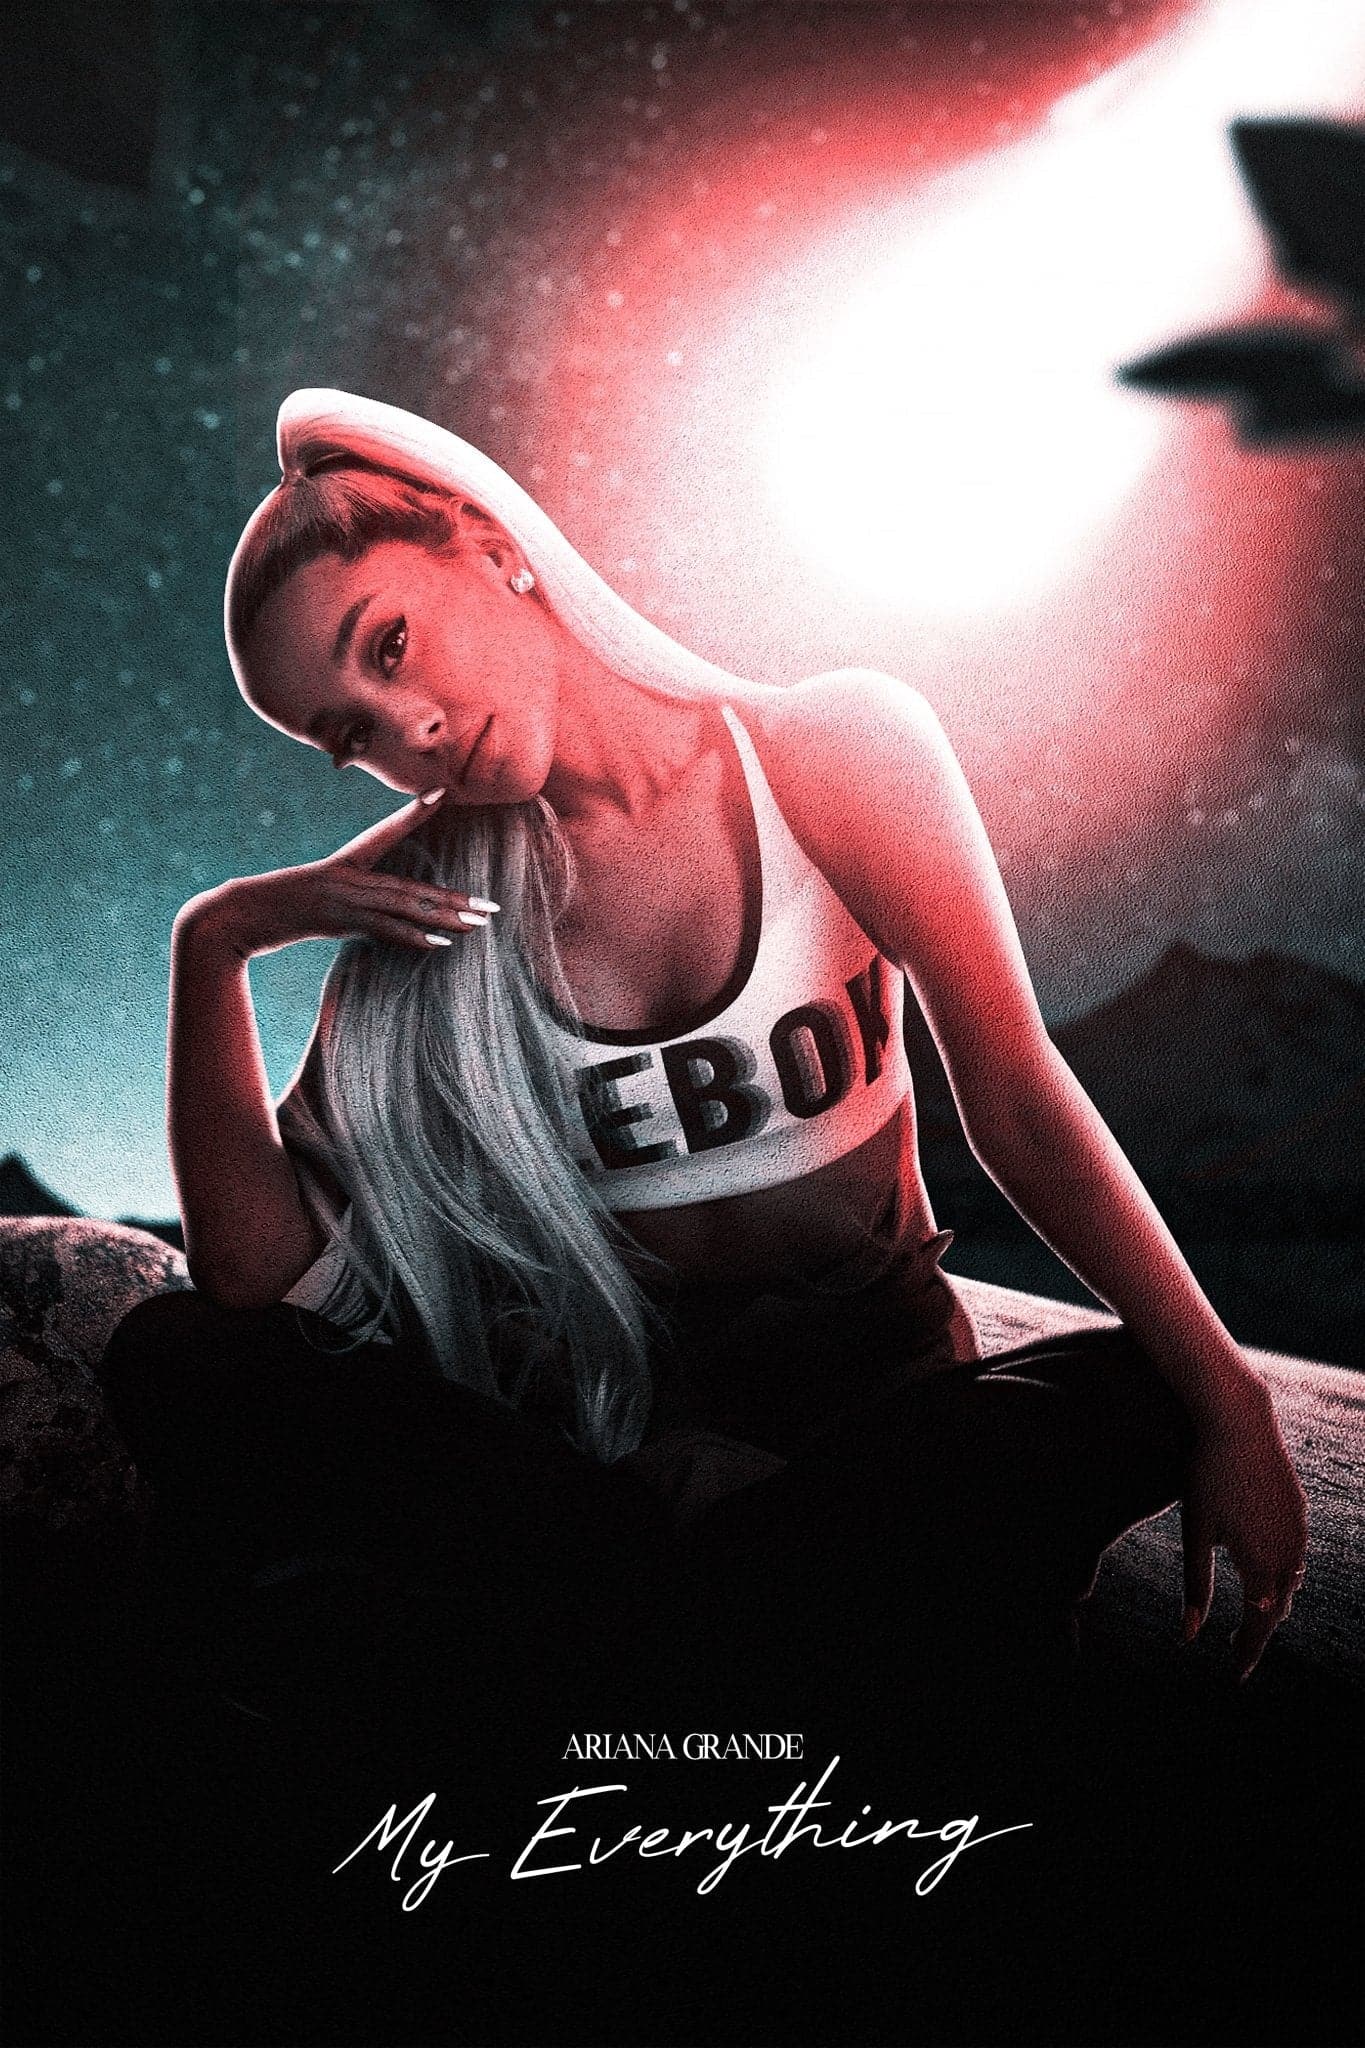 Ariana Grande ‘My Everything’ Poster - Posters Plug